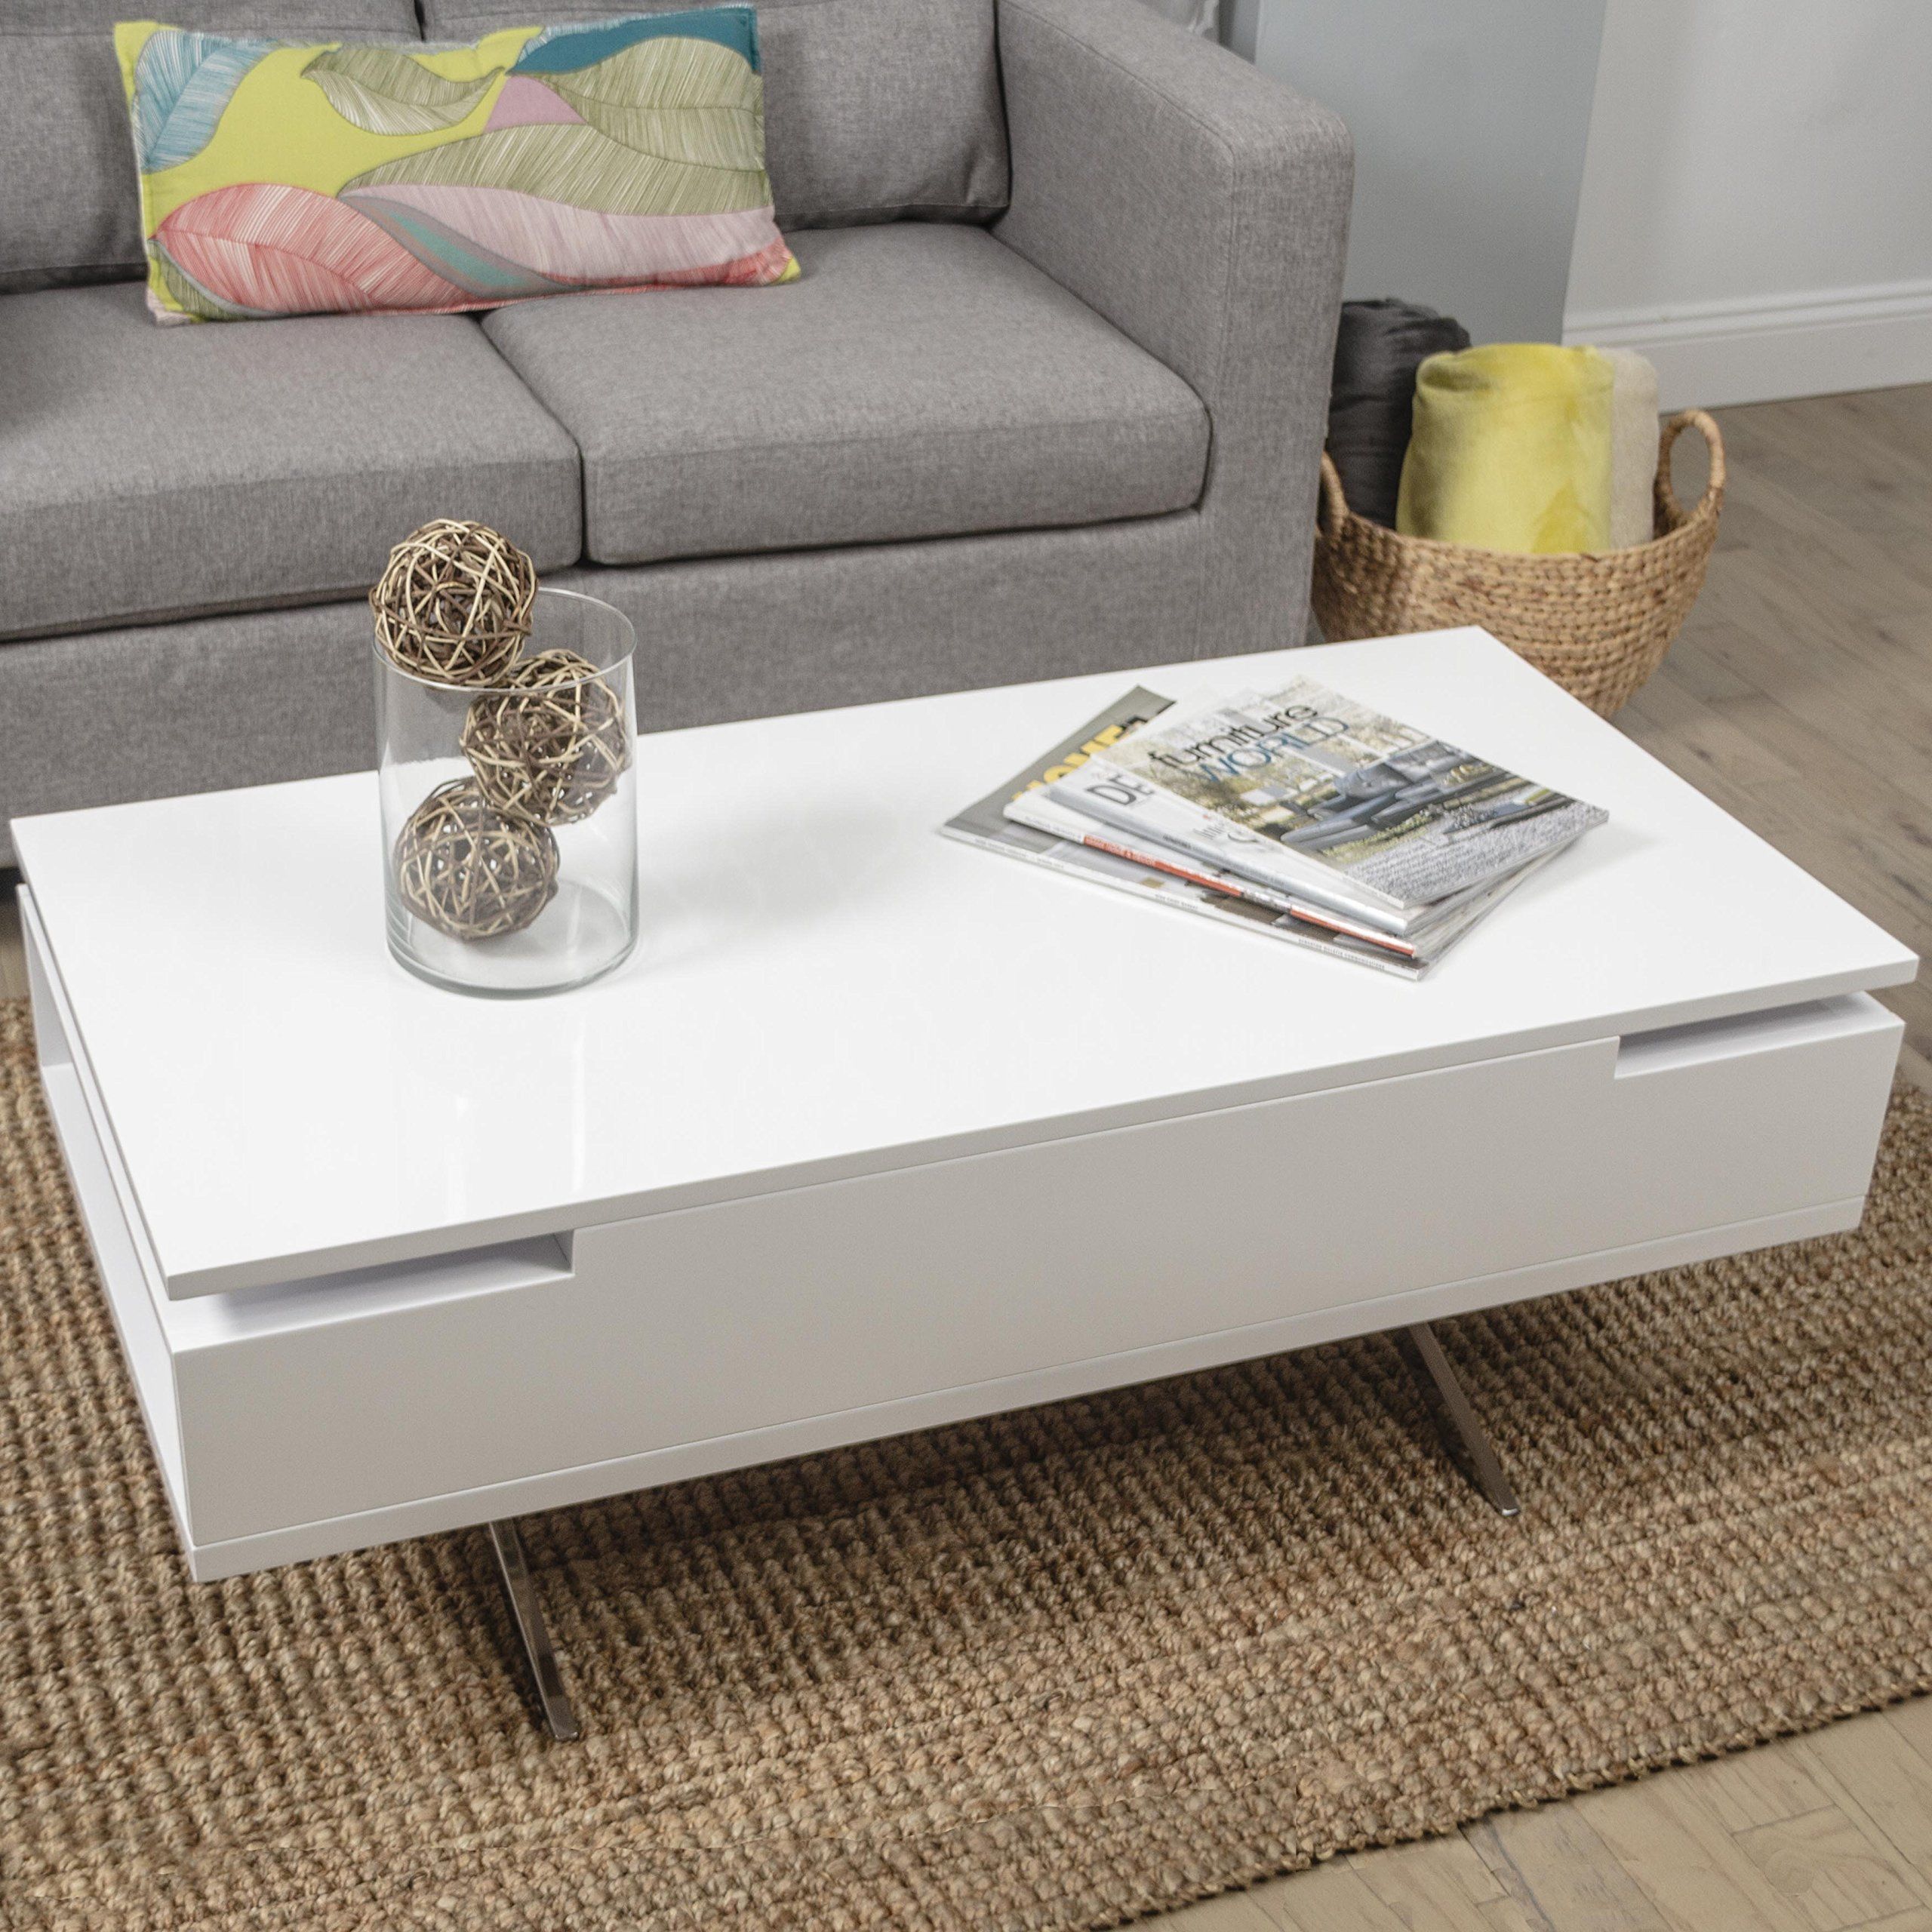 Mix High Gloss Lacquer Wood Stainless Steel Legs White Lifttop With Regard To High Gloss Lift Top Coffee Tables (View 2 of 15)